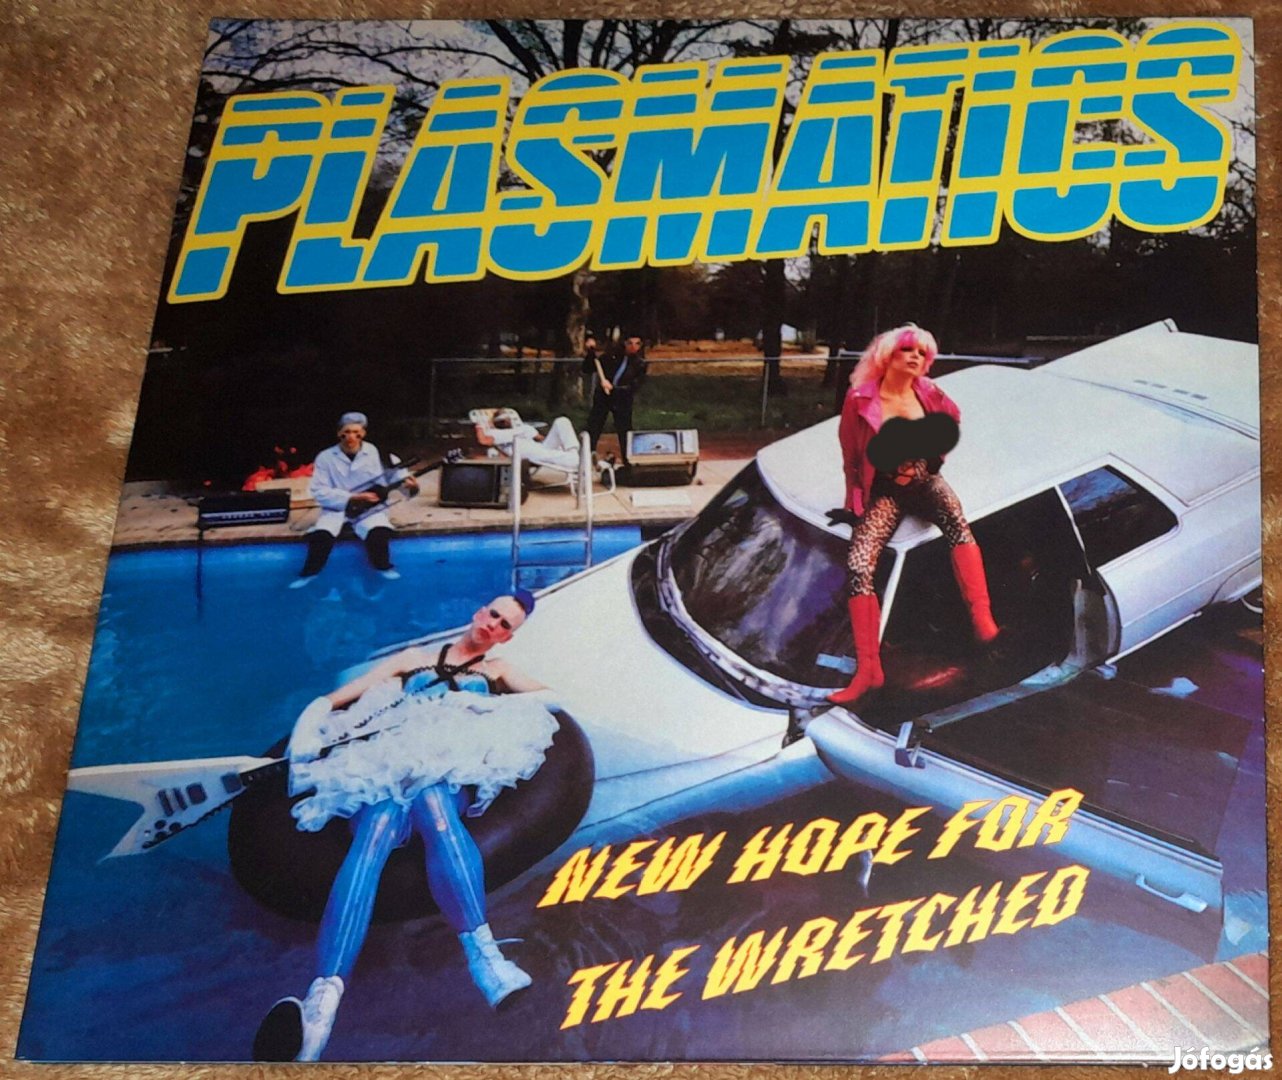 Plasmatics - New Hope For The Wretched (2 LP) (punk classic)